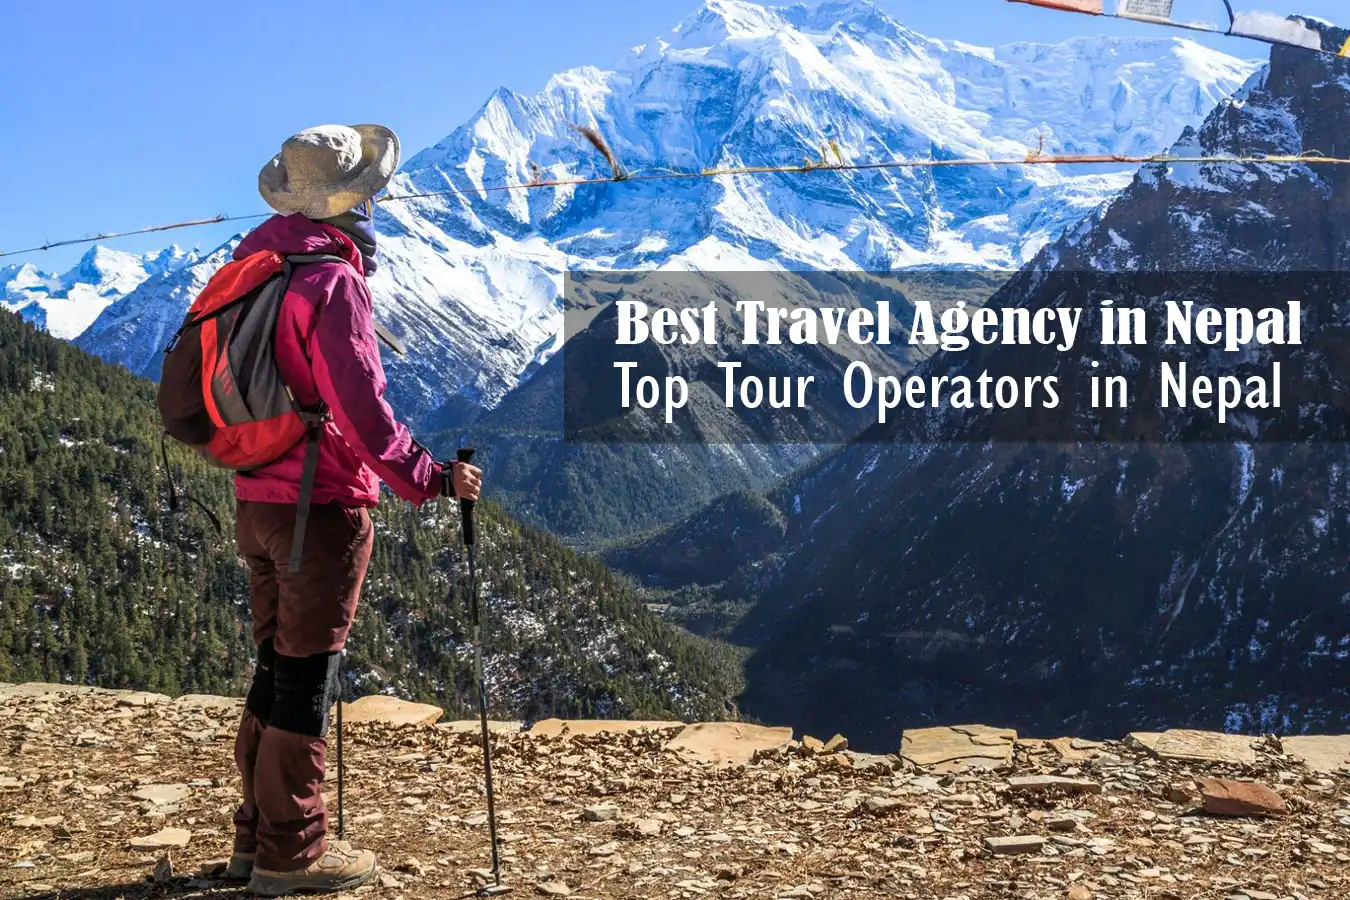 The Best Travel Agency in Nepal: Key to Incredible Exploration